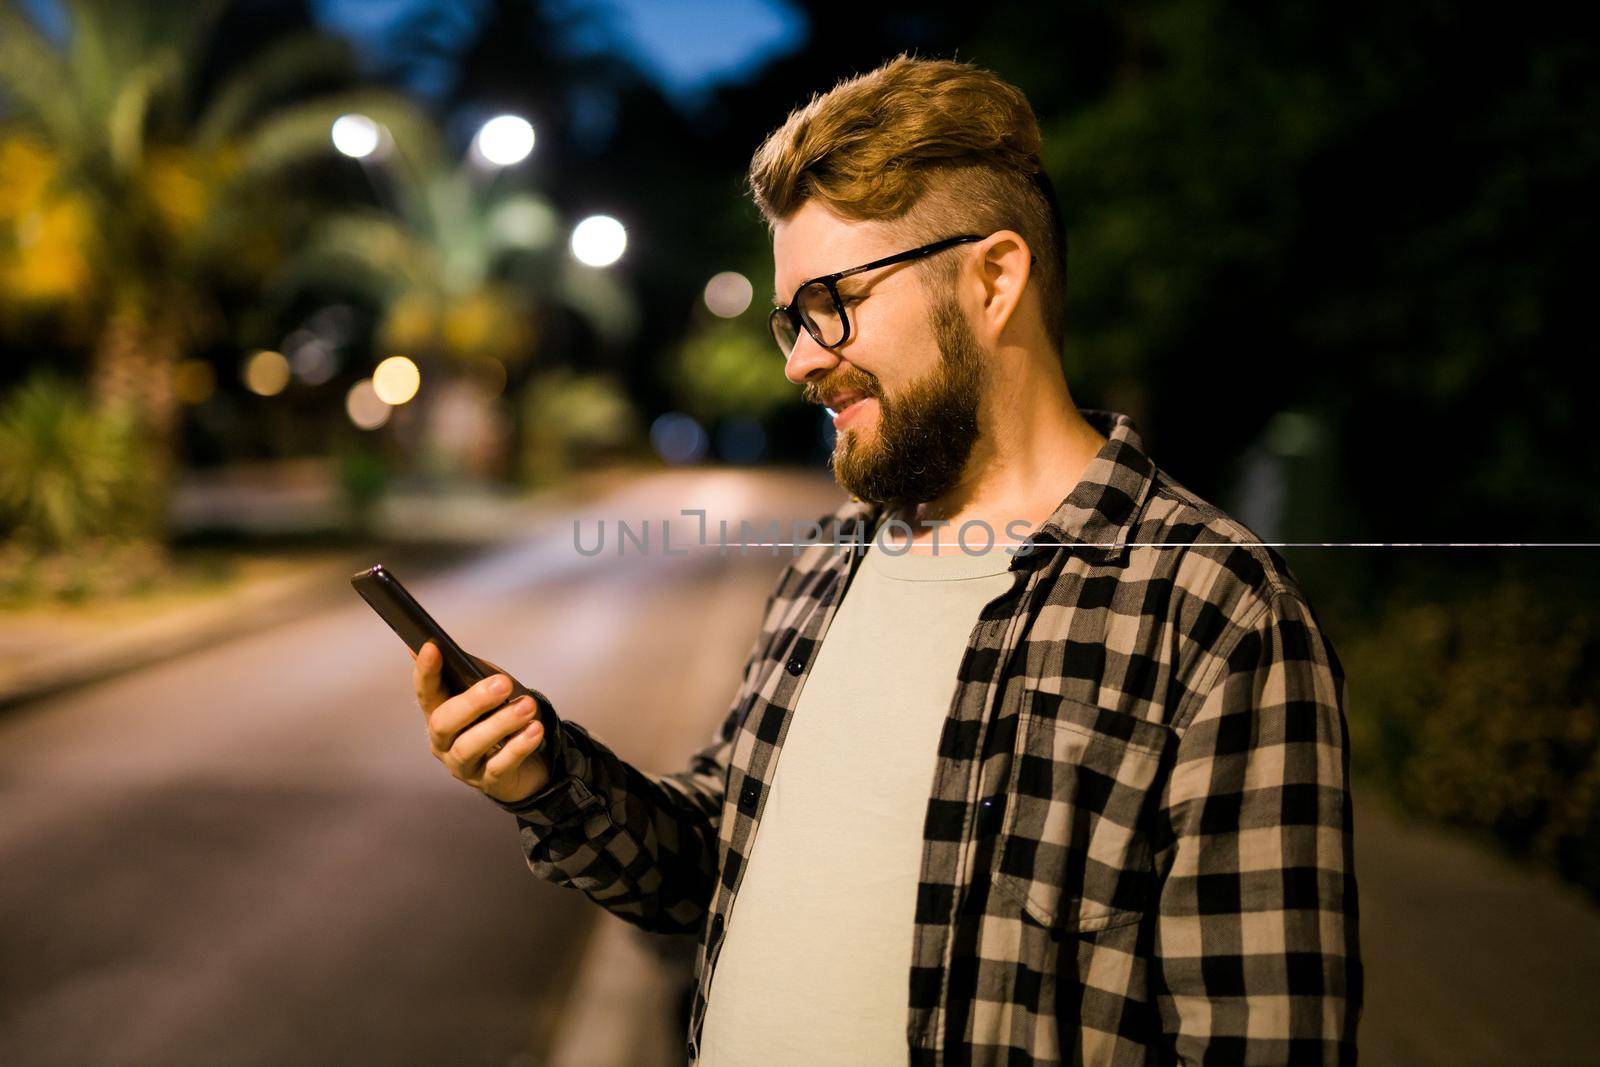 Man waits taxi by using transportation app on night street. Technologies and city